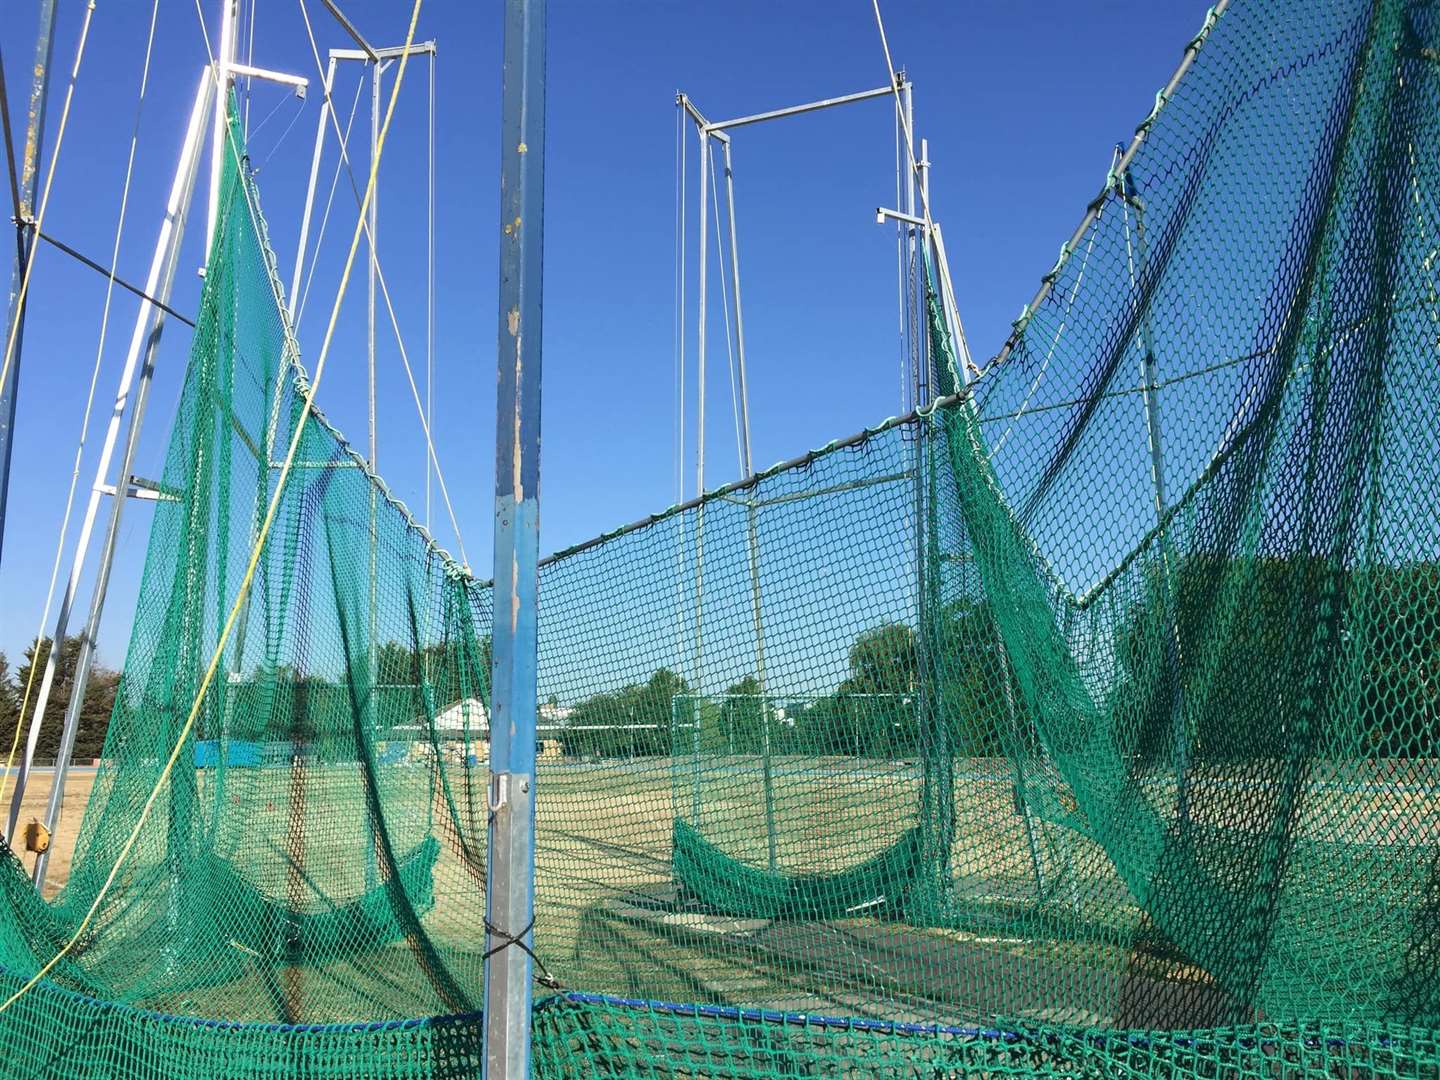 Central Park Athletics club's throwing cage, after being damaged by vandals